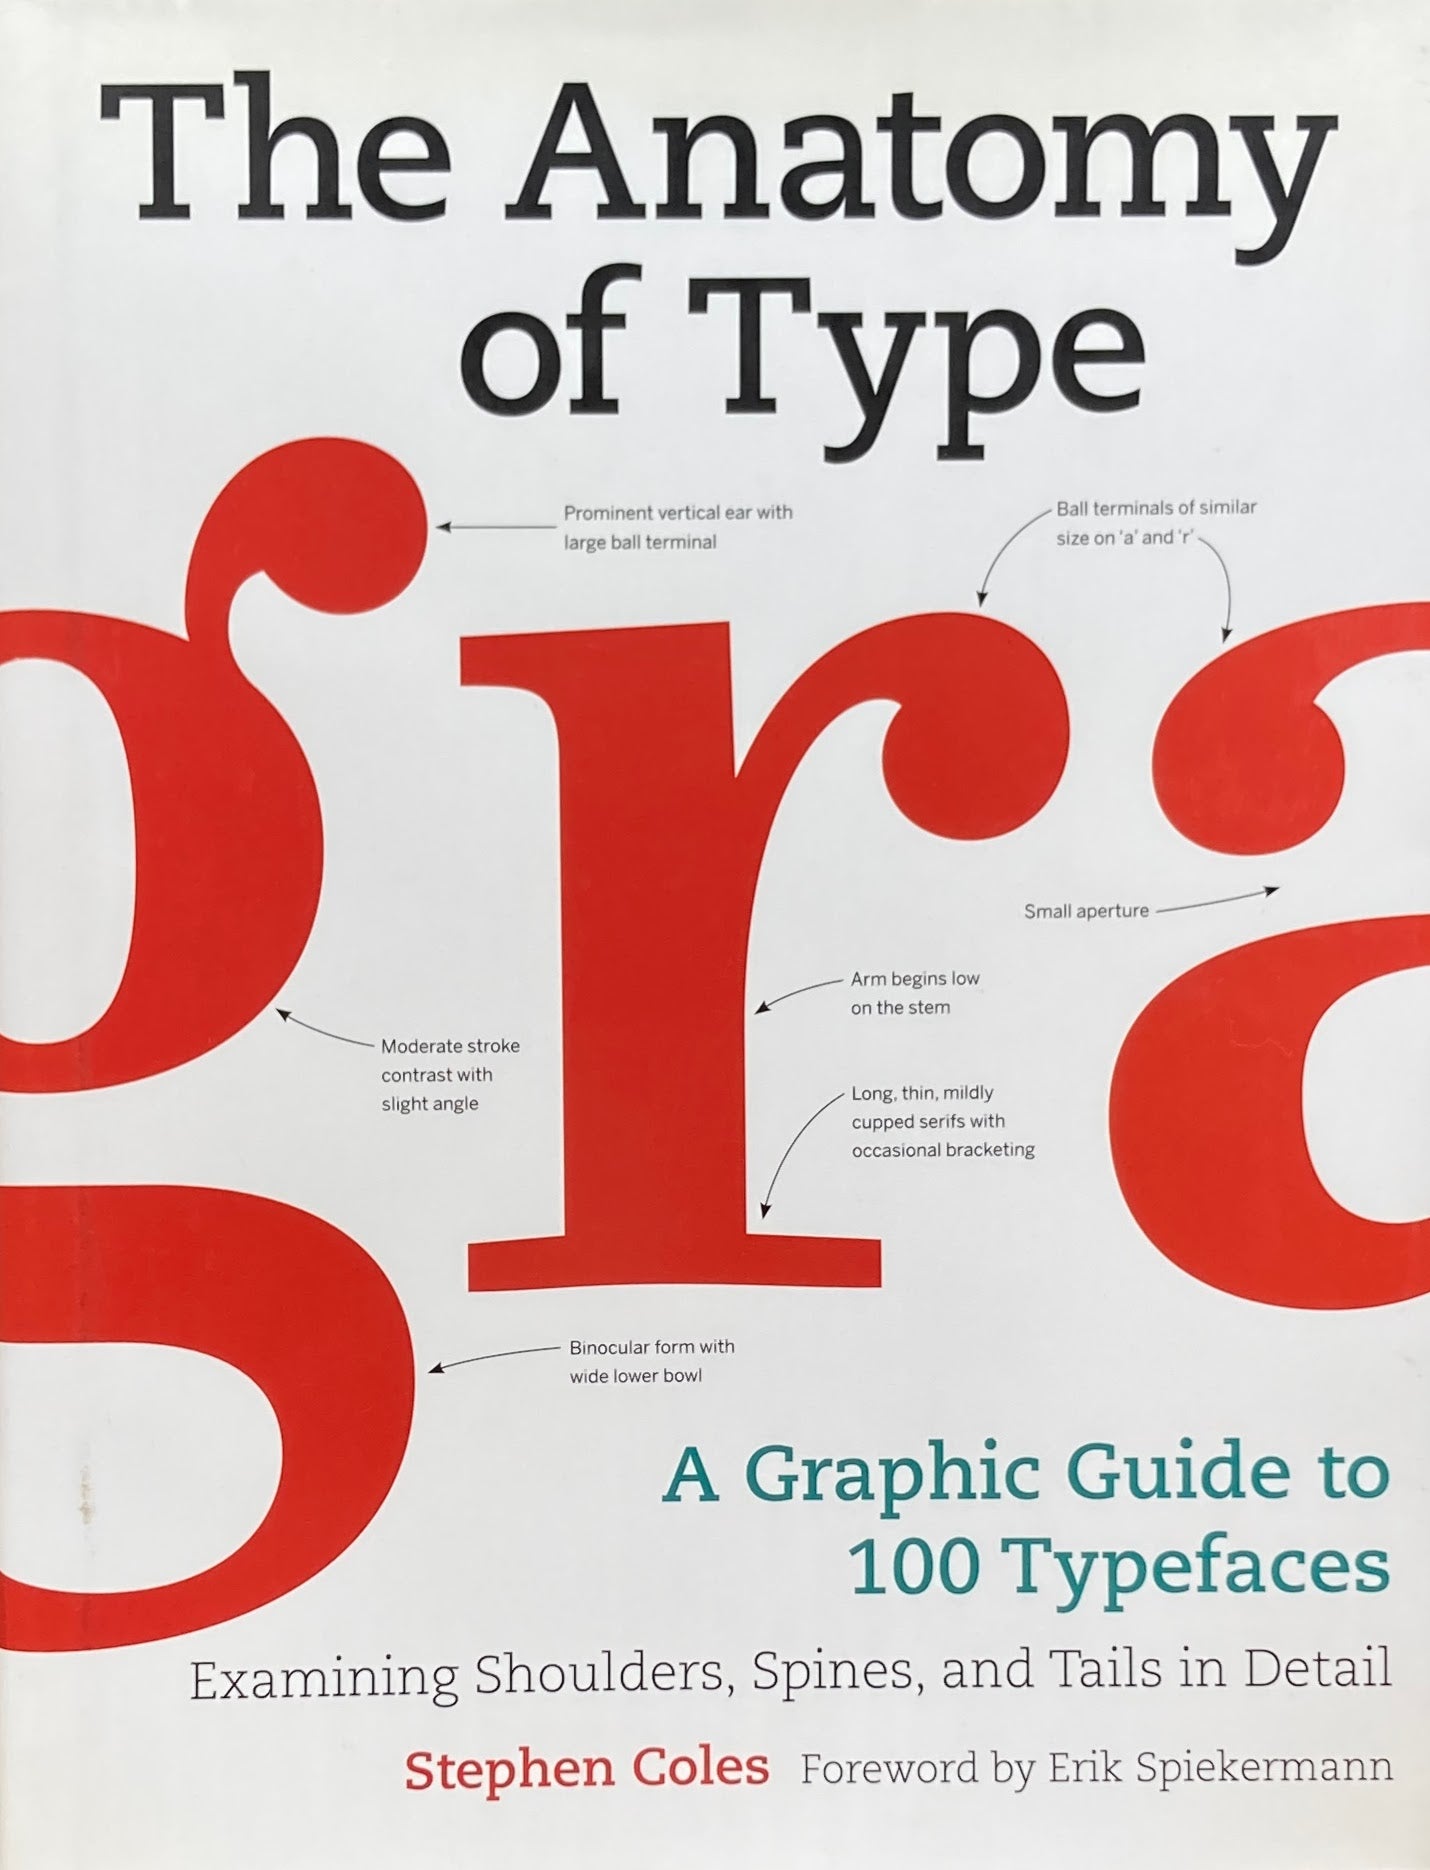 The Anatomy of Type　 A Graphic Guide to 100 Typefaces　Stephen Coles